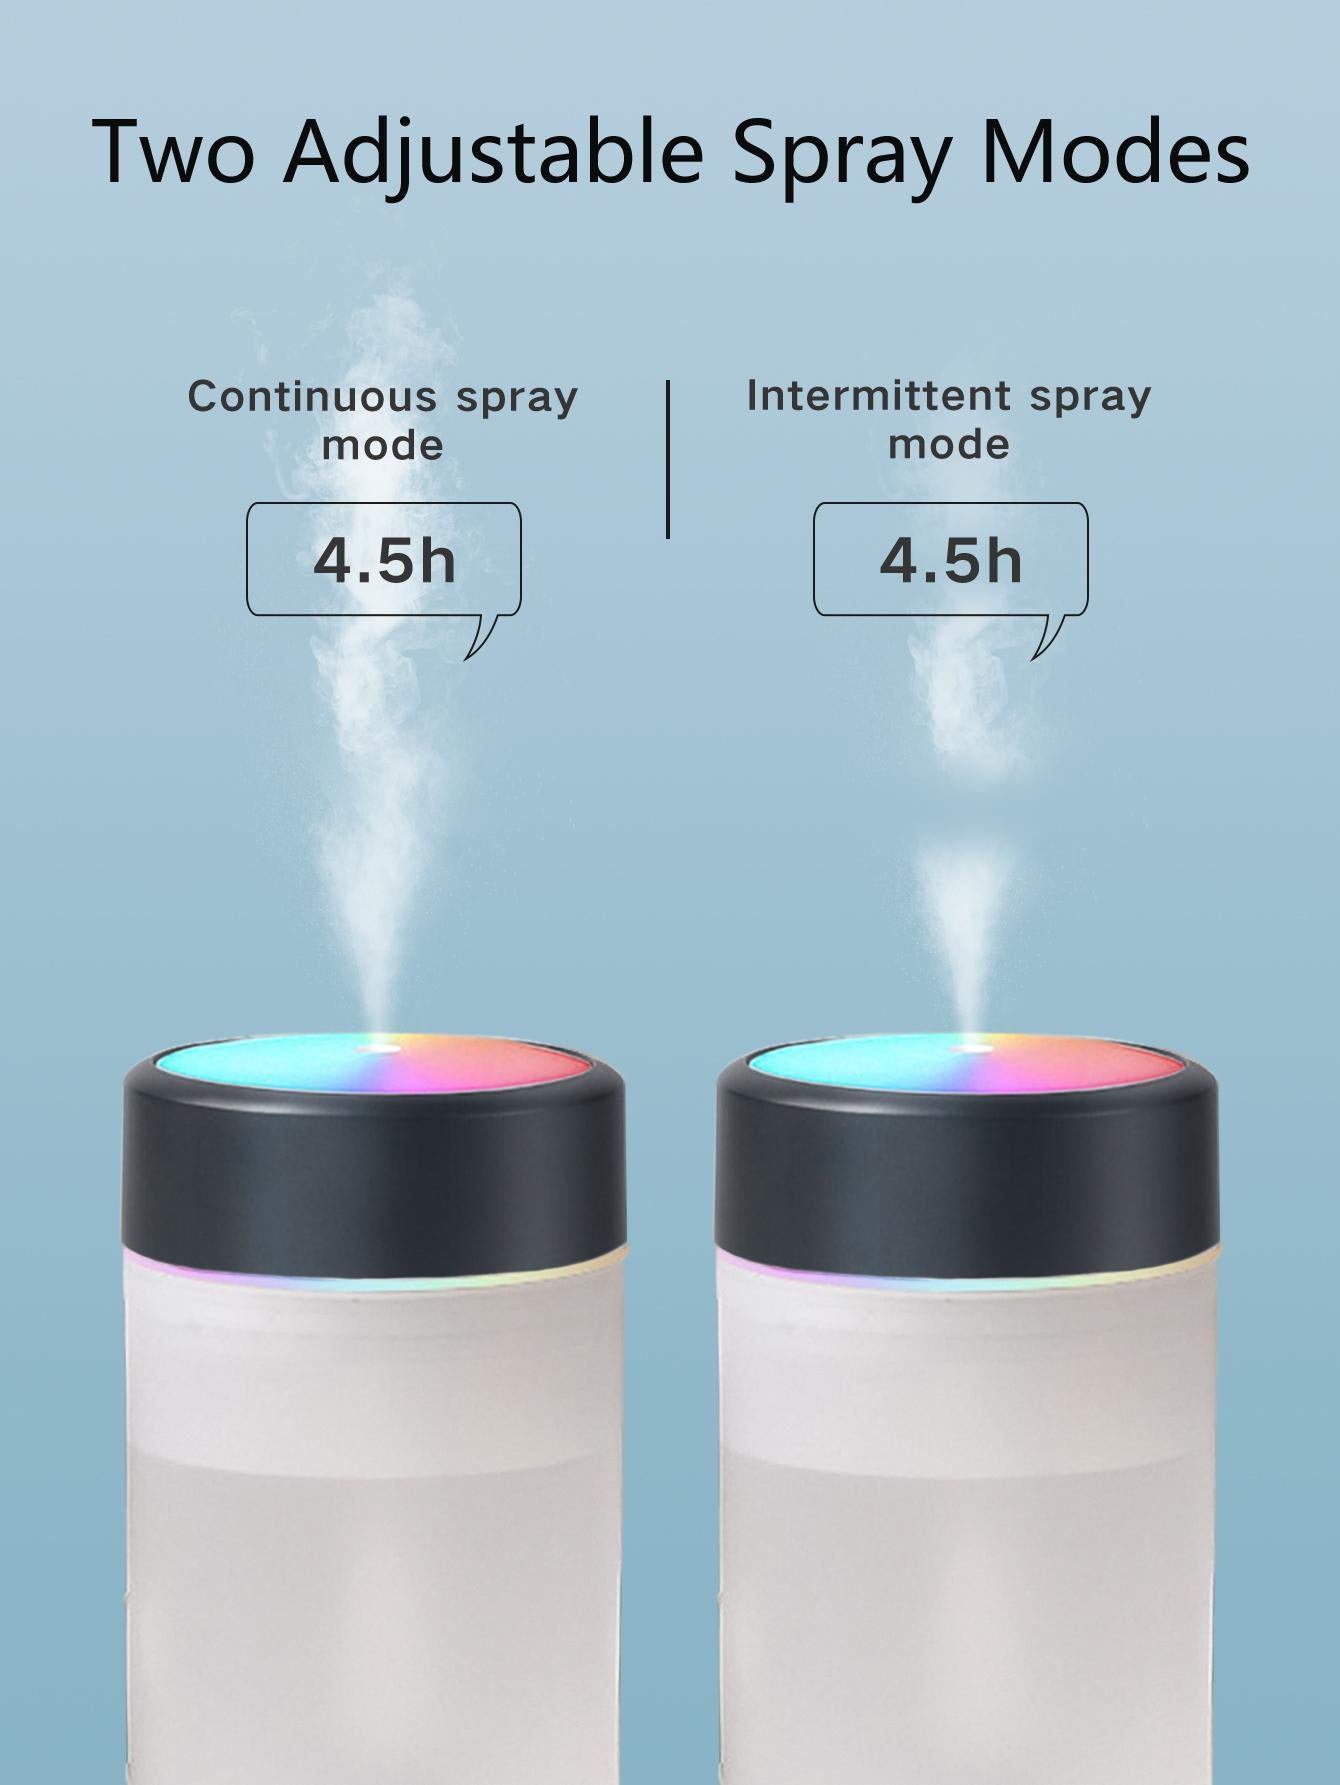 Portable Mini Humidifier, 360ml Small Ultrasonic Cool Mist Humidifier, USB Personal Desktop Humidifier for Baby Bedroom Travel Office Home Car, Auto Shut-Off, 2 Mist Modes, Super Quiet, Colorful Night Light